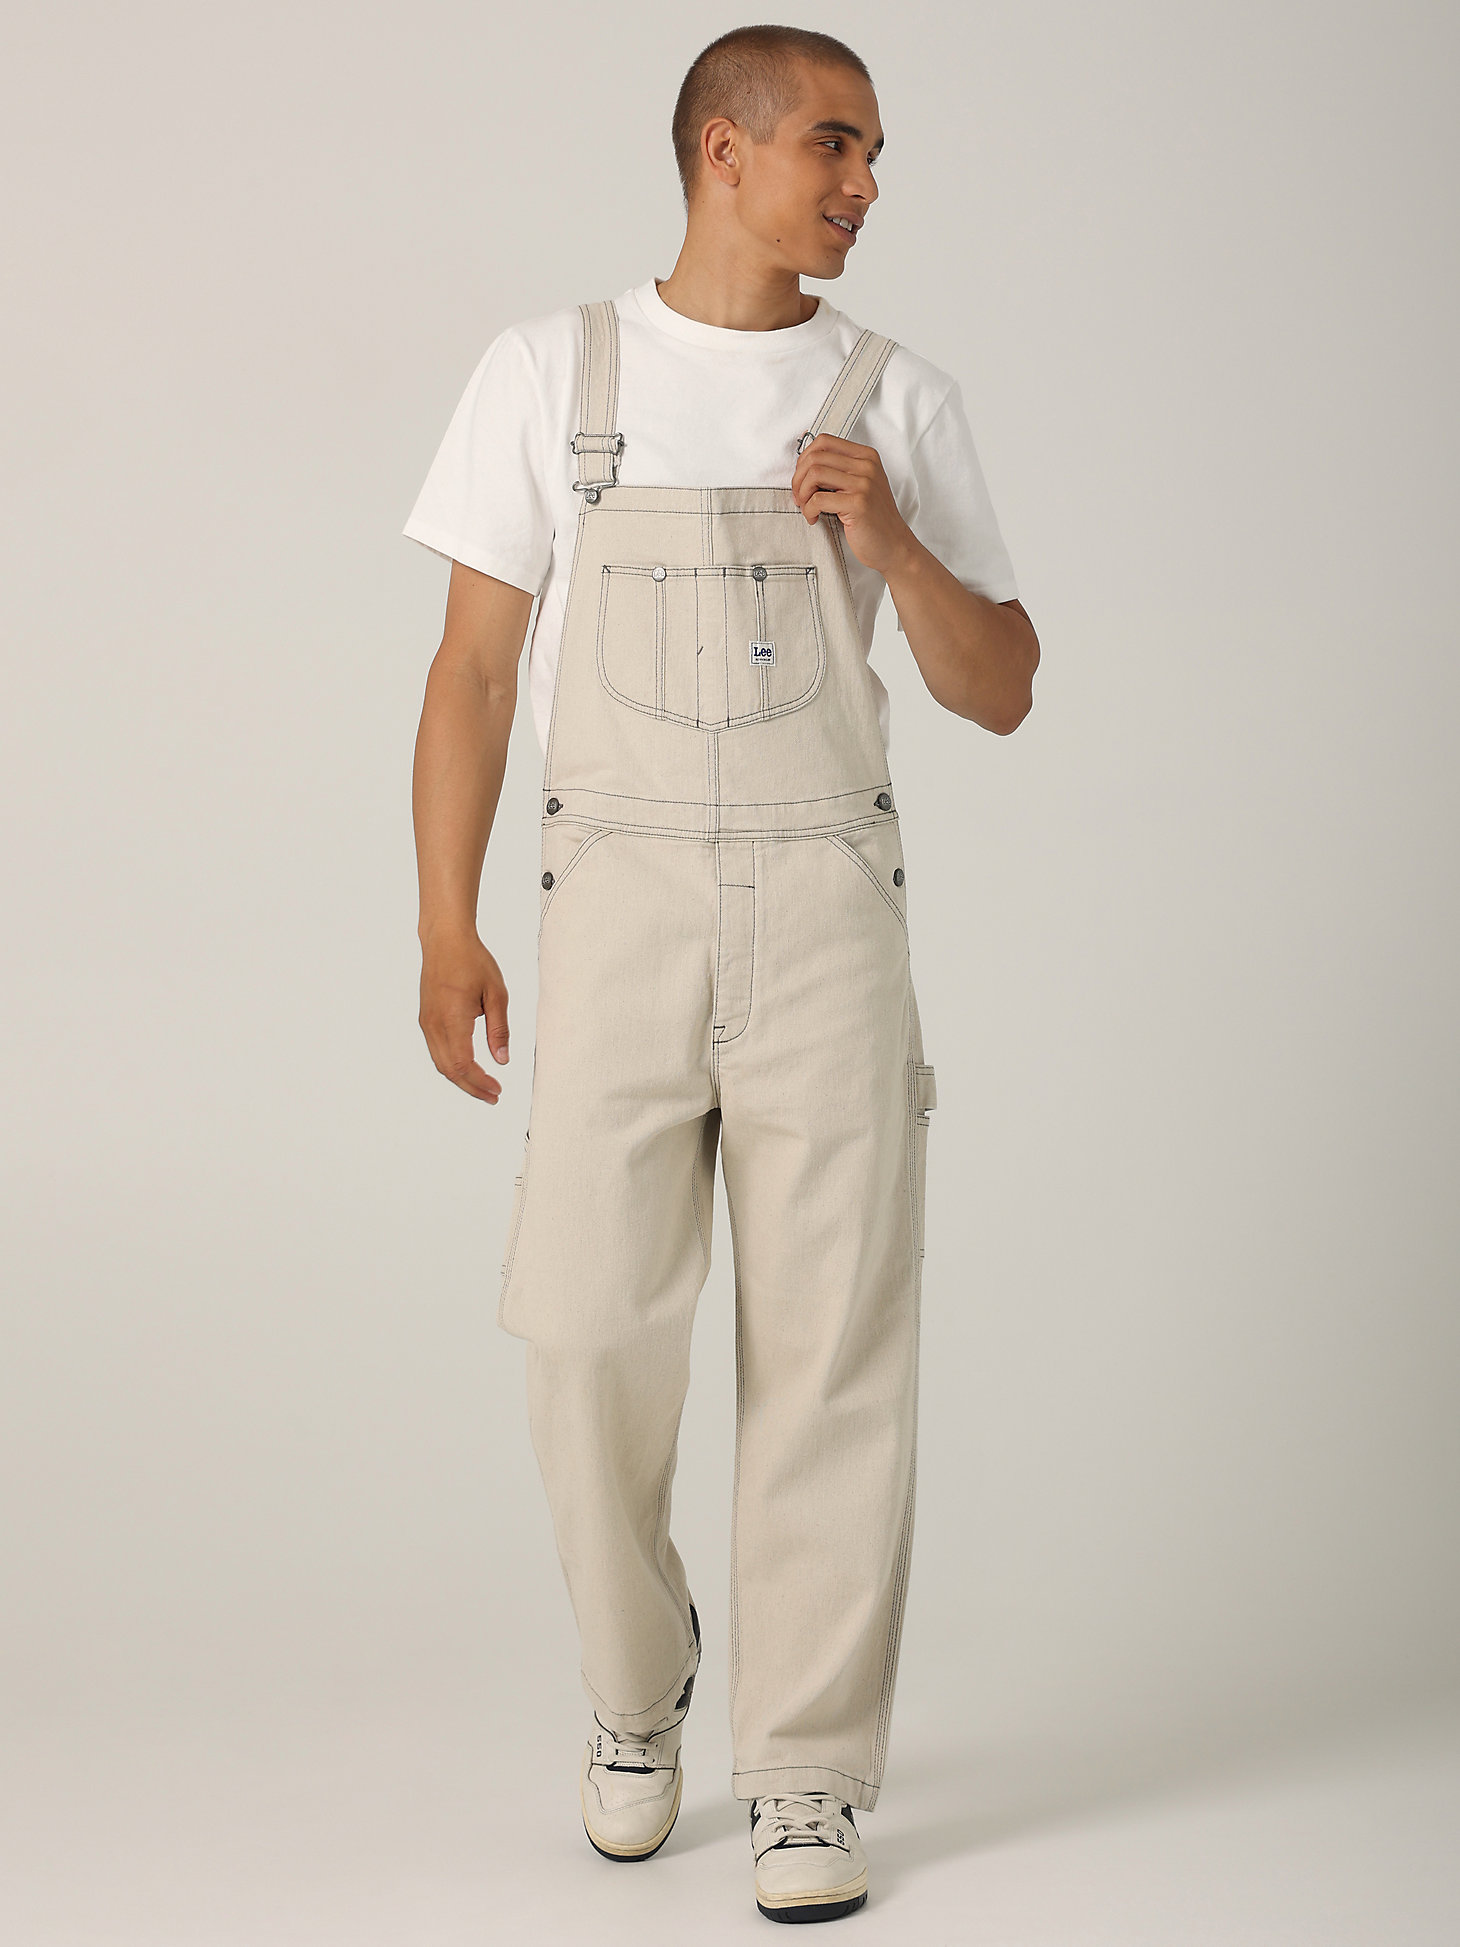 Men's Heritage Relaxed Fit Bib Overall in Rinse main view